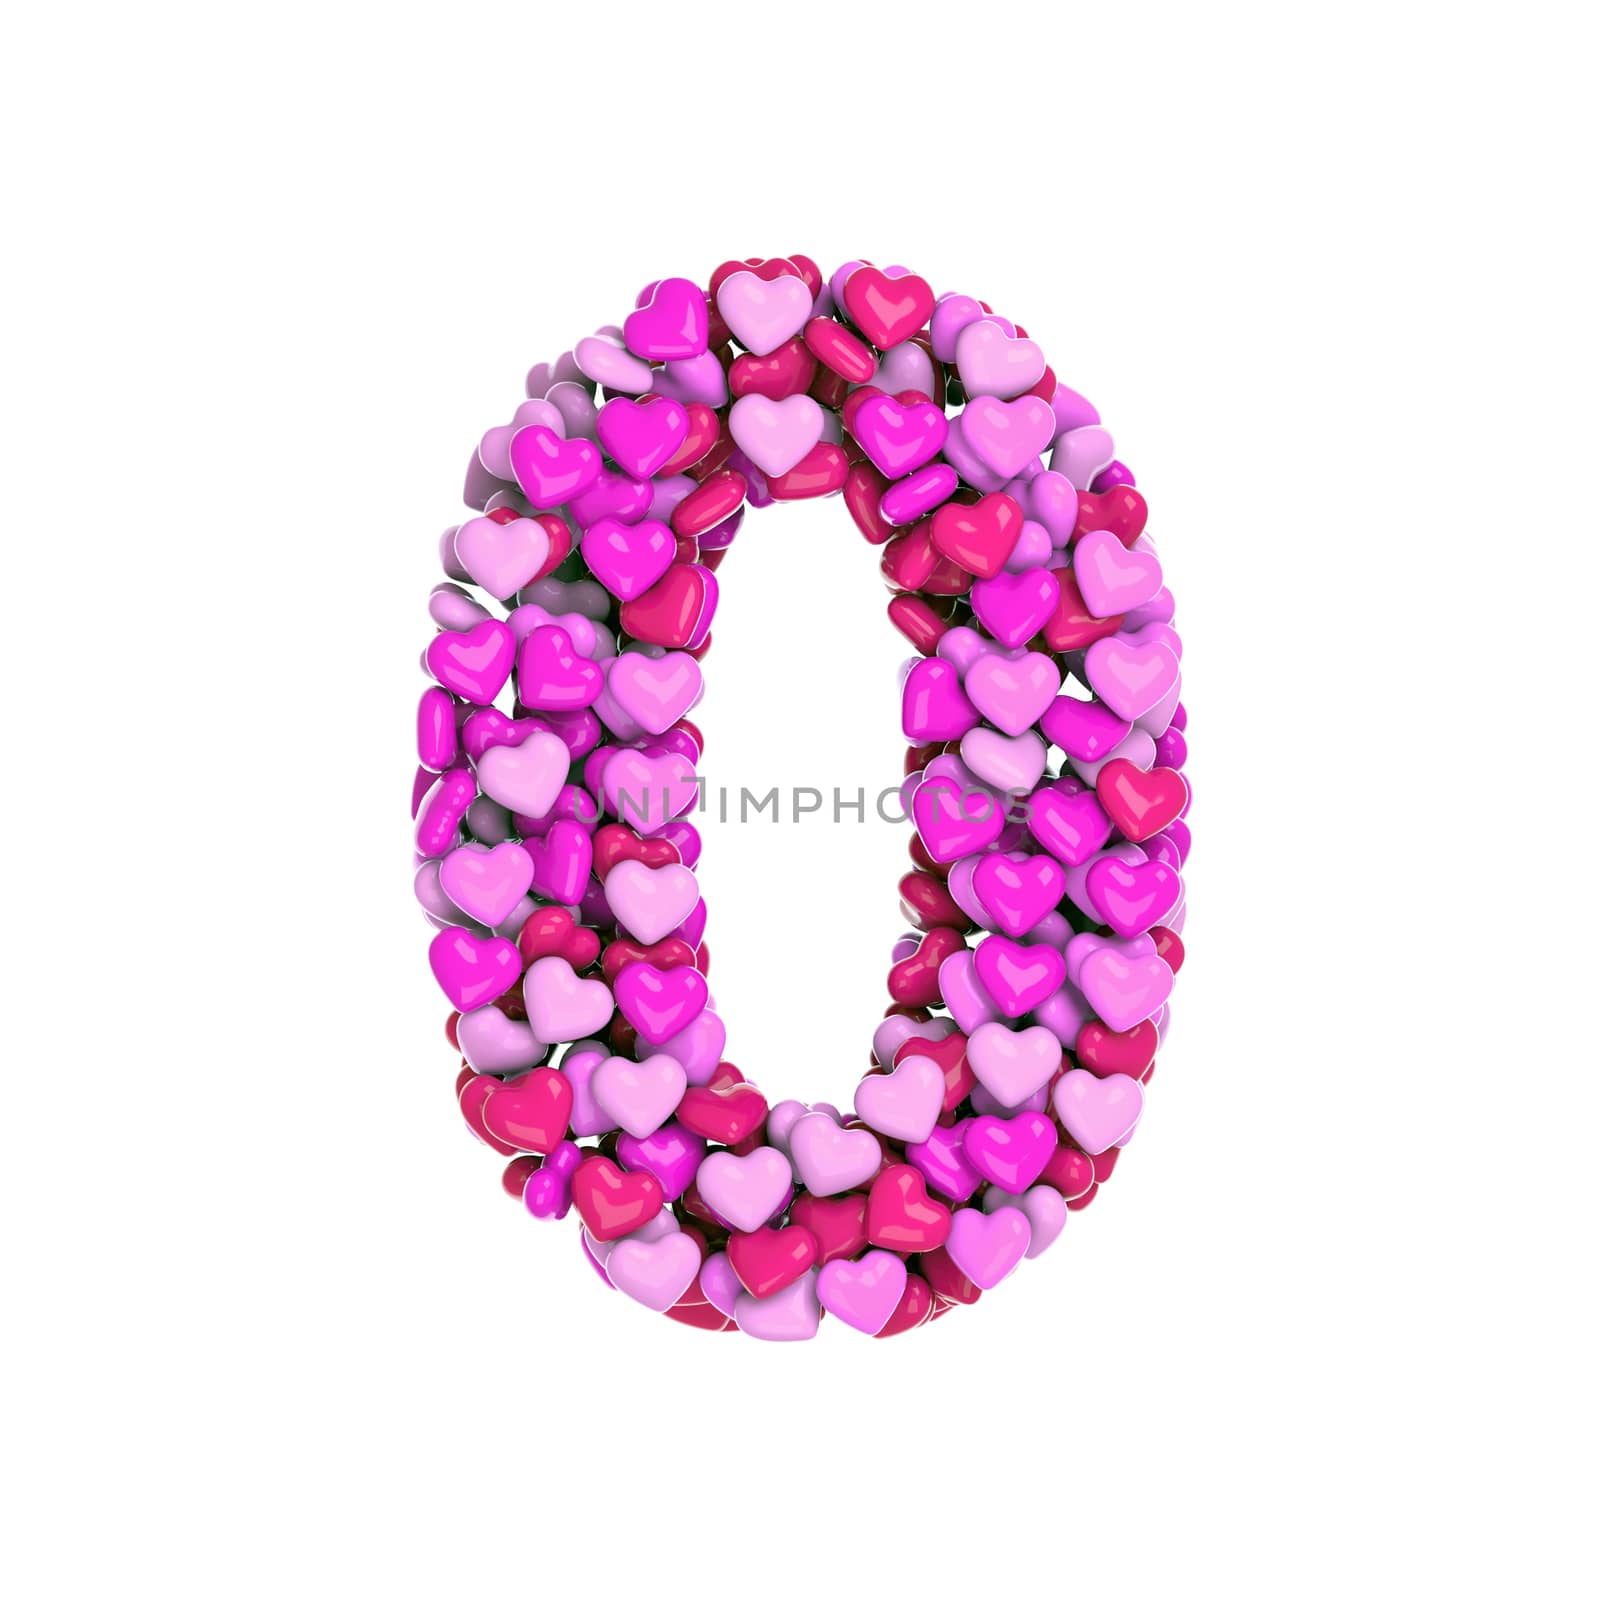 Valentine number 0 - 3d pink hearts digit isolated on white background. This alphabet is perfect for creative illustrations related but not limited to Love, passion, wedding...